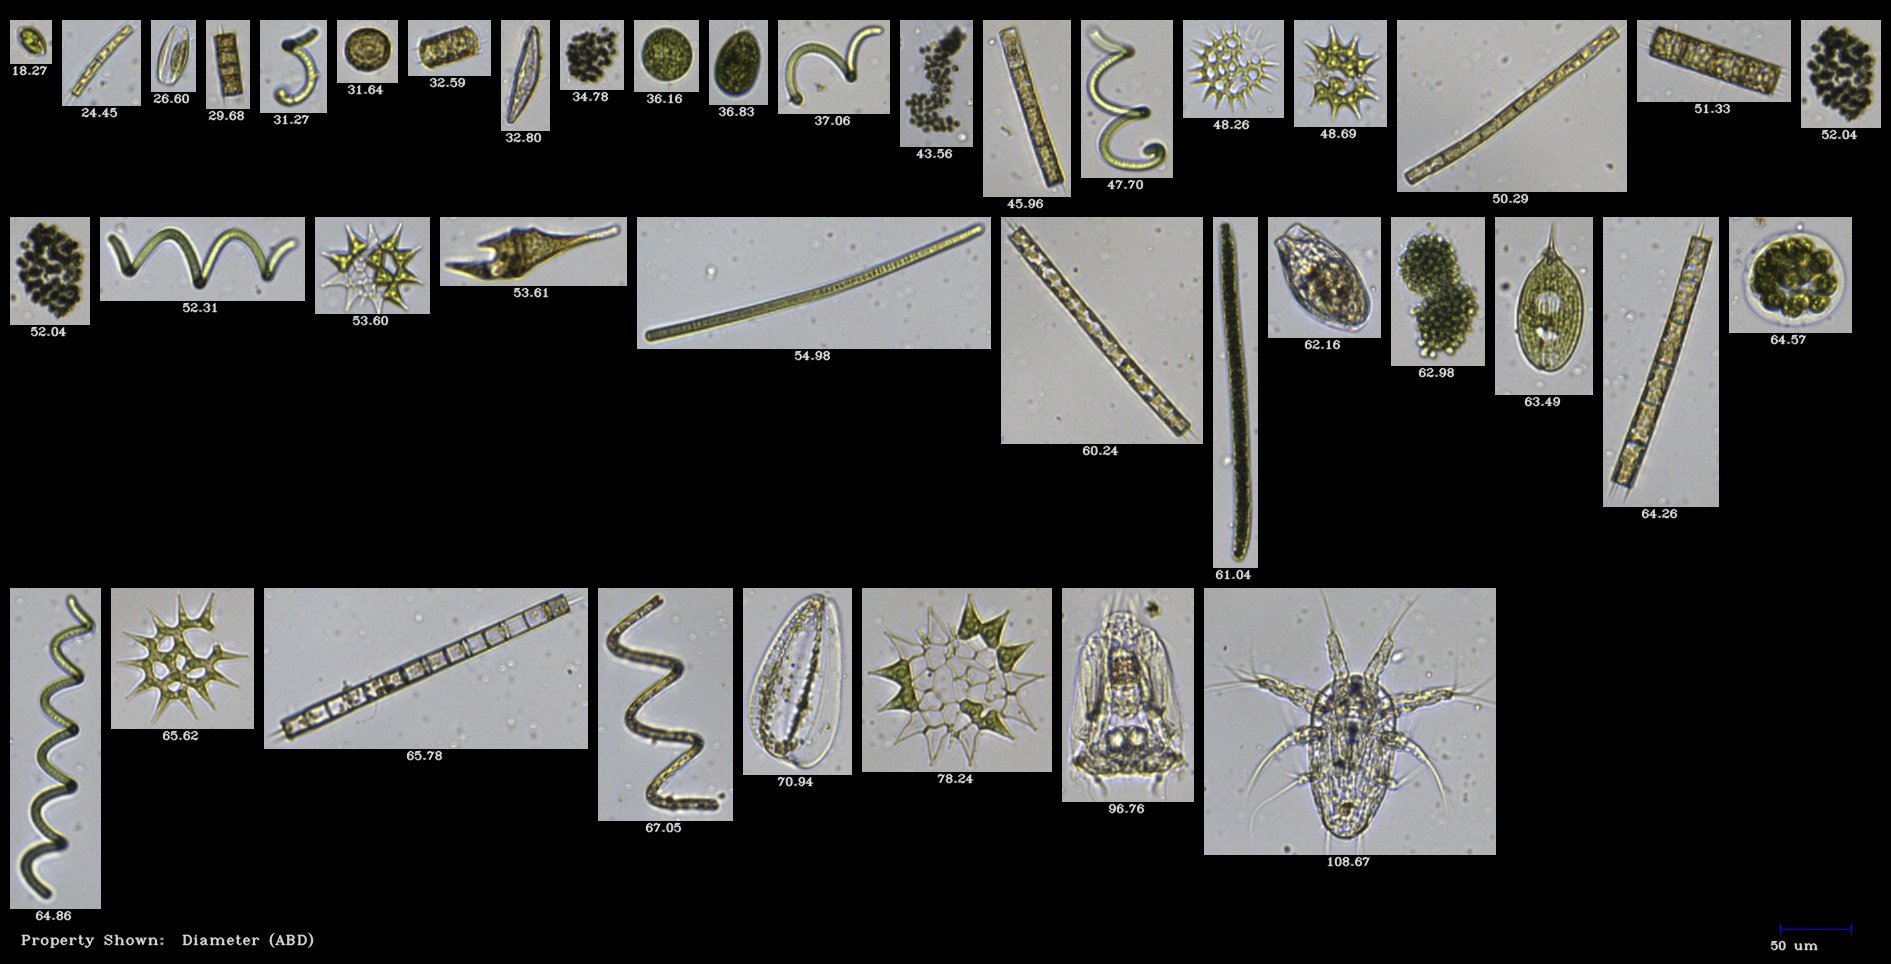 FlowCam collage of plankton from Yangtze River